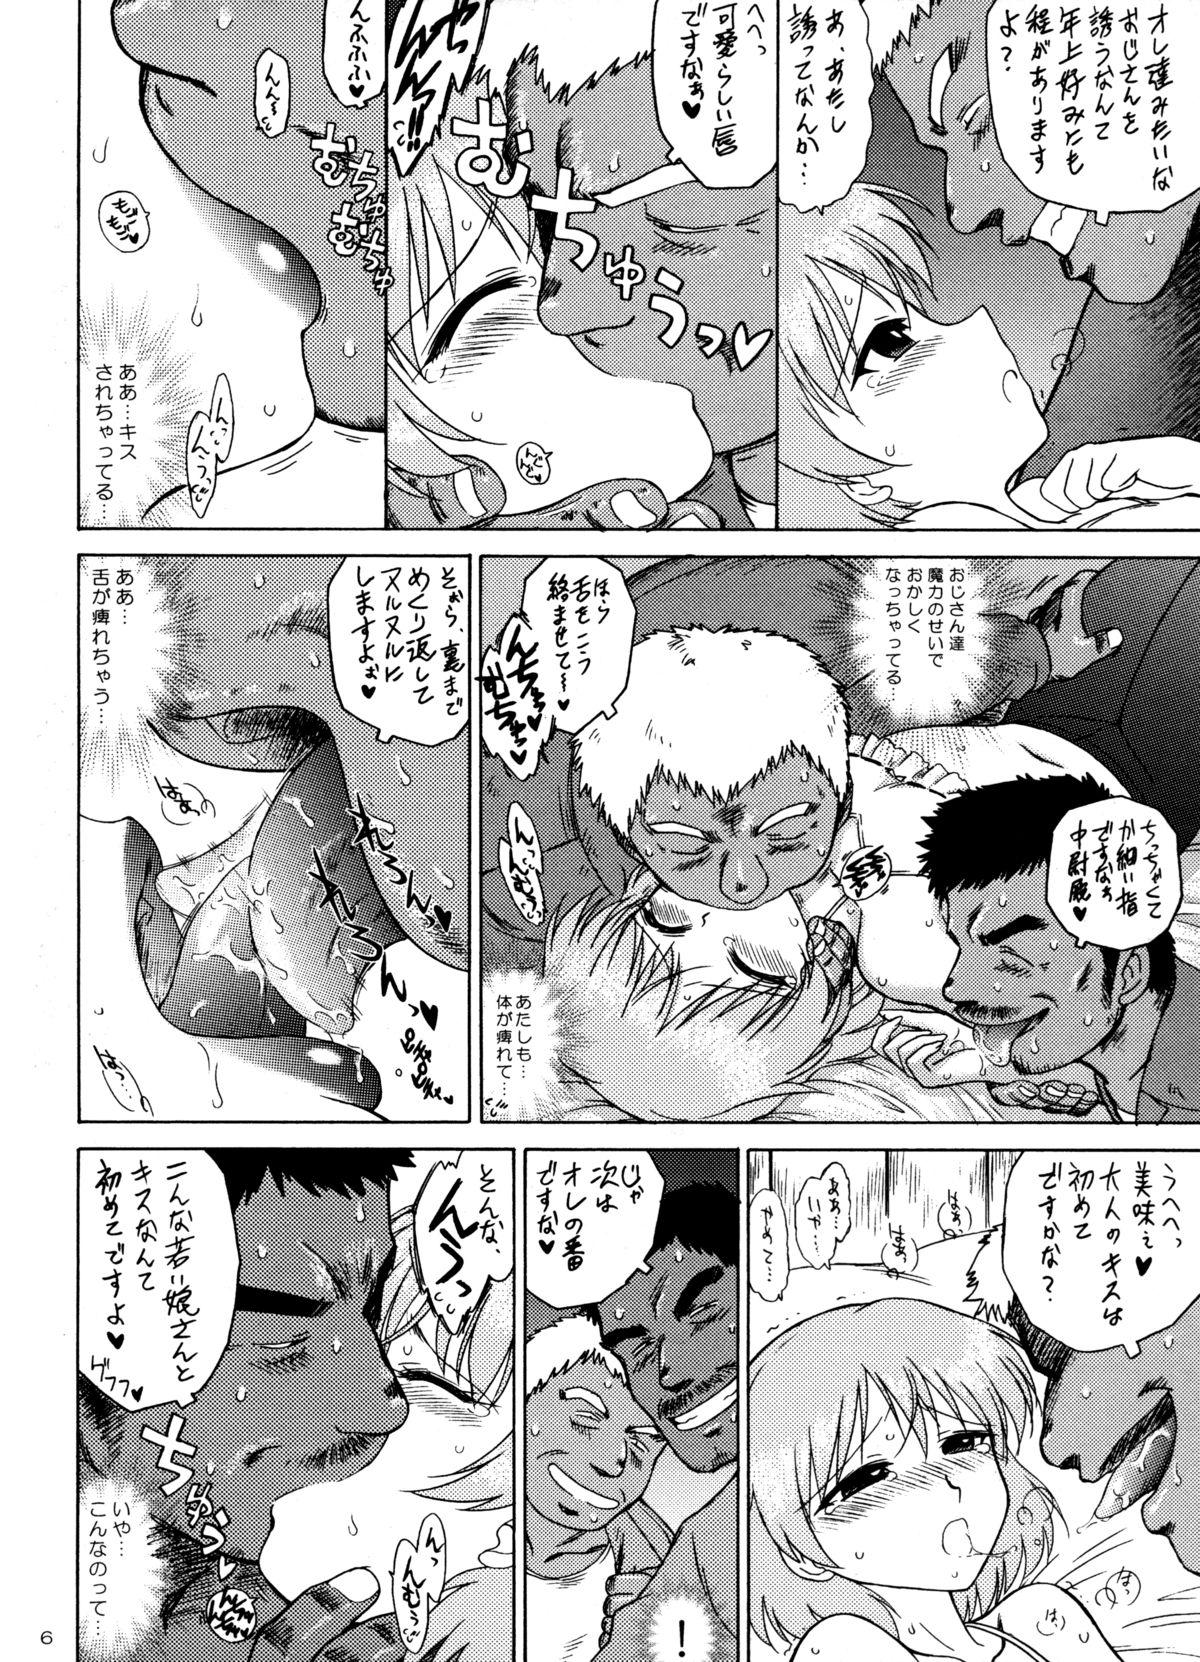 Latino SURVIVOR - Strike witches Squirting - Page 5